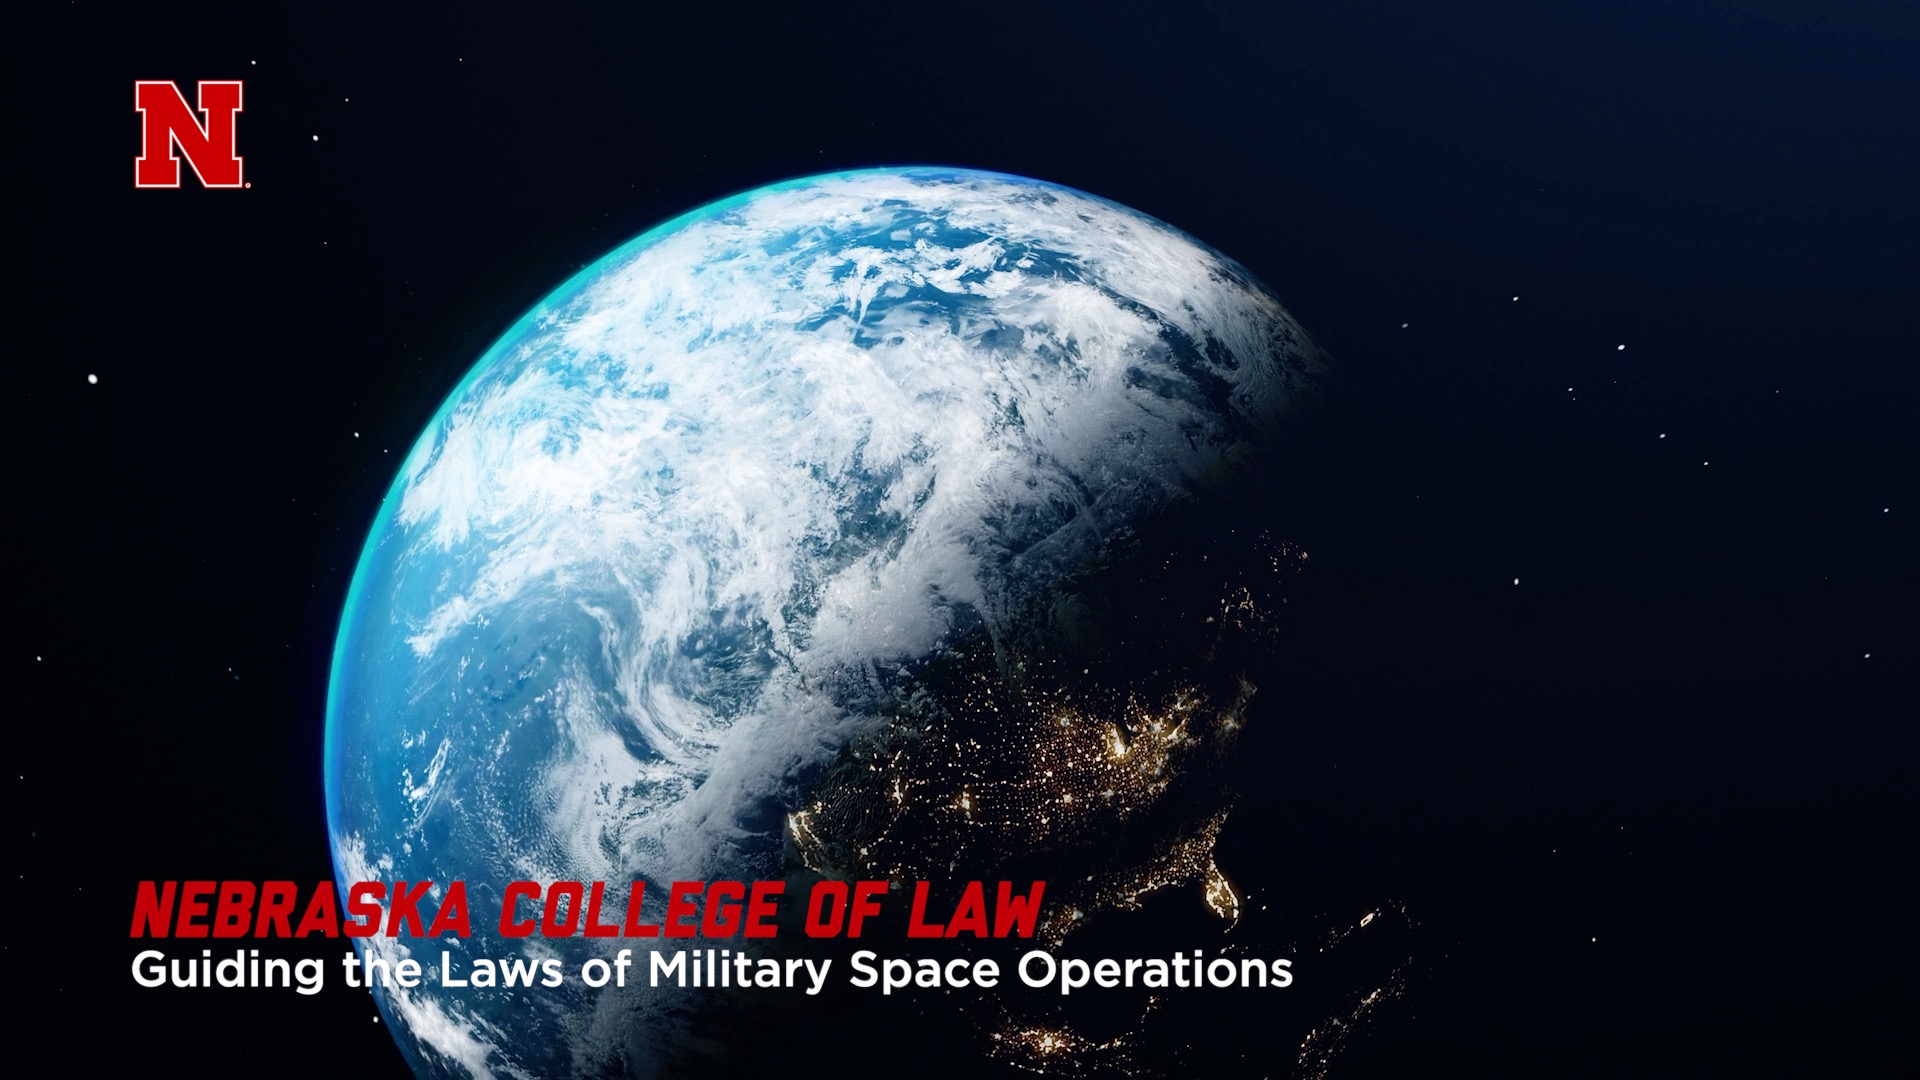 Nebraska College of Law - Guiding the Laws of Military Space Operations